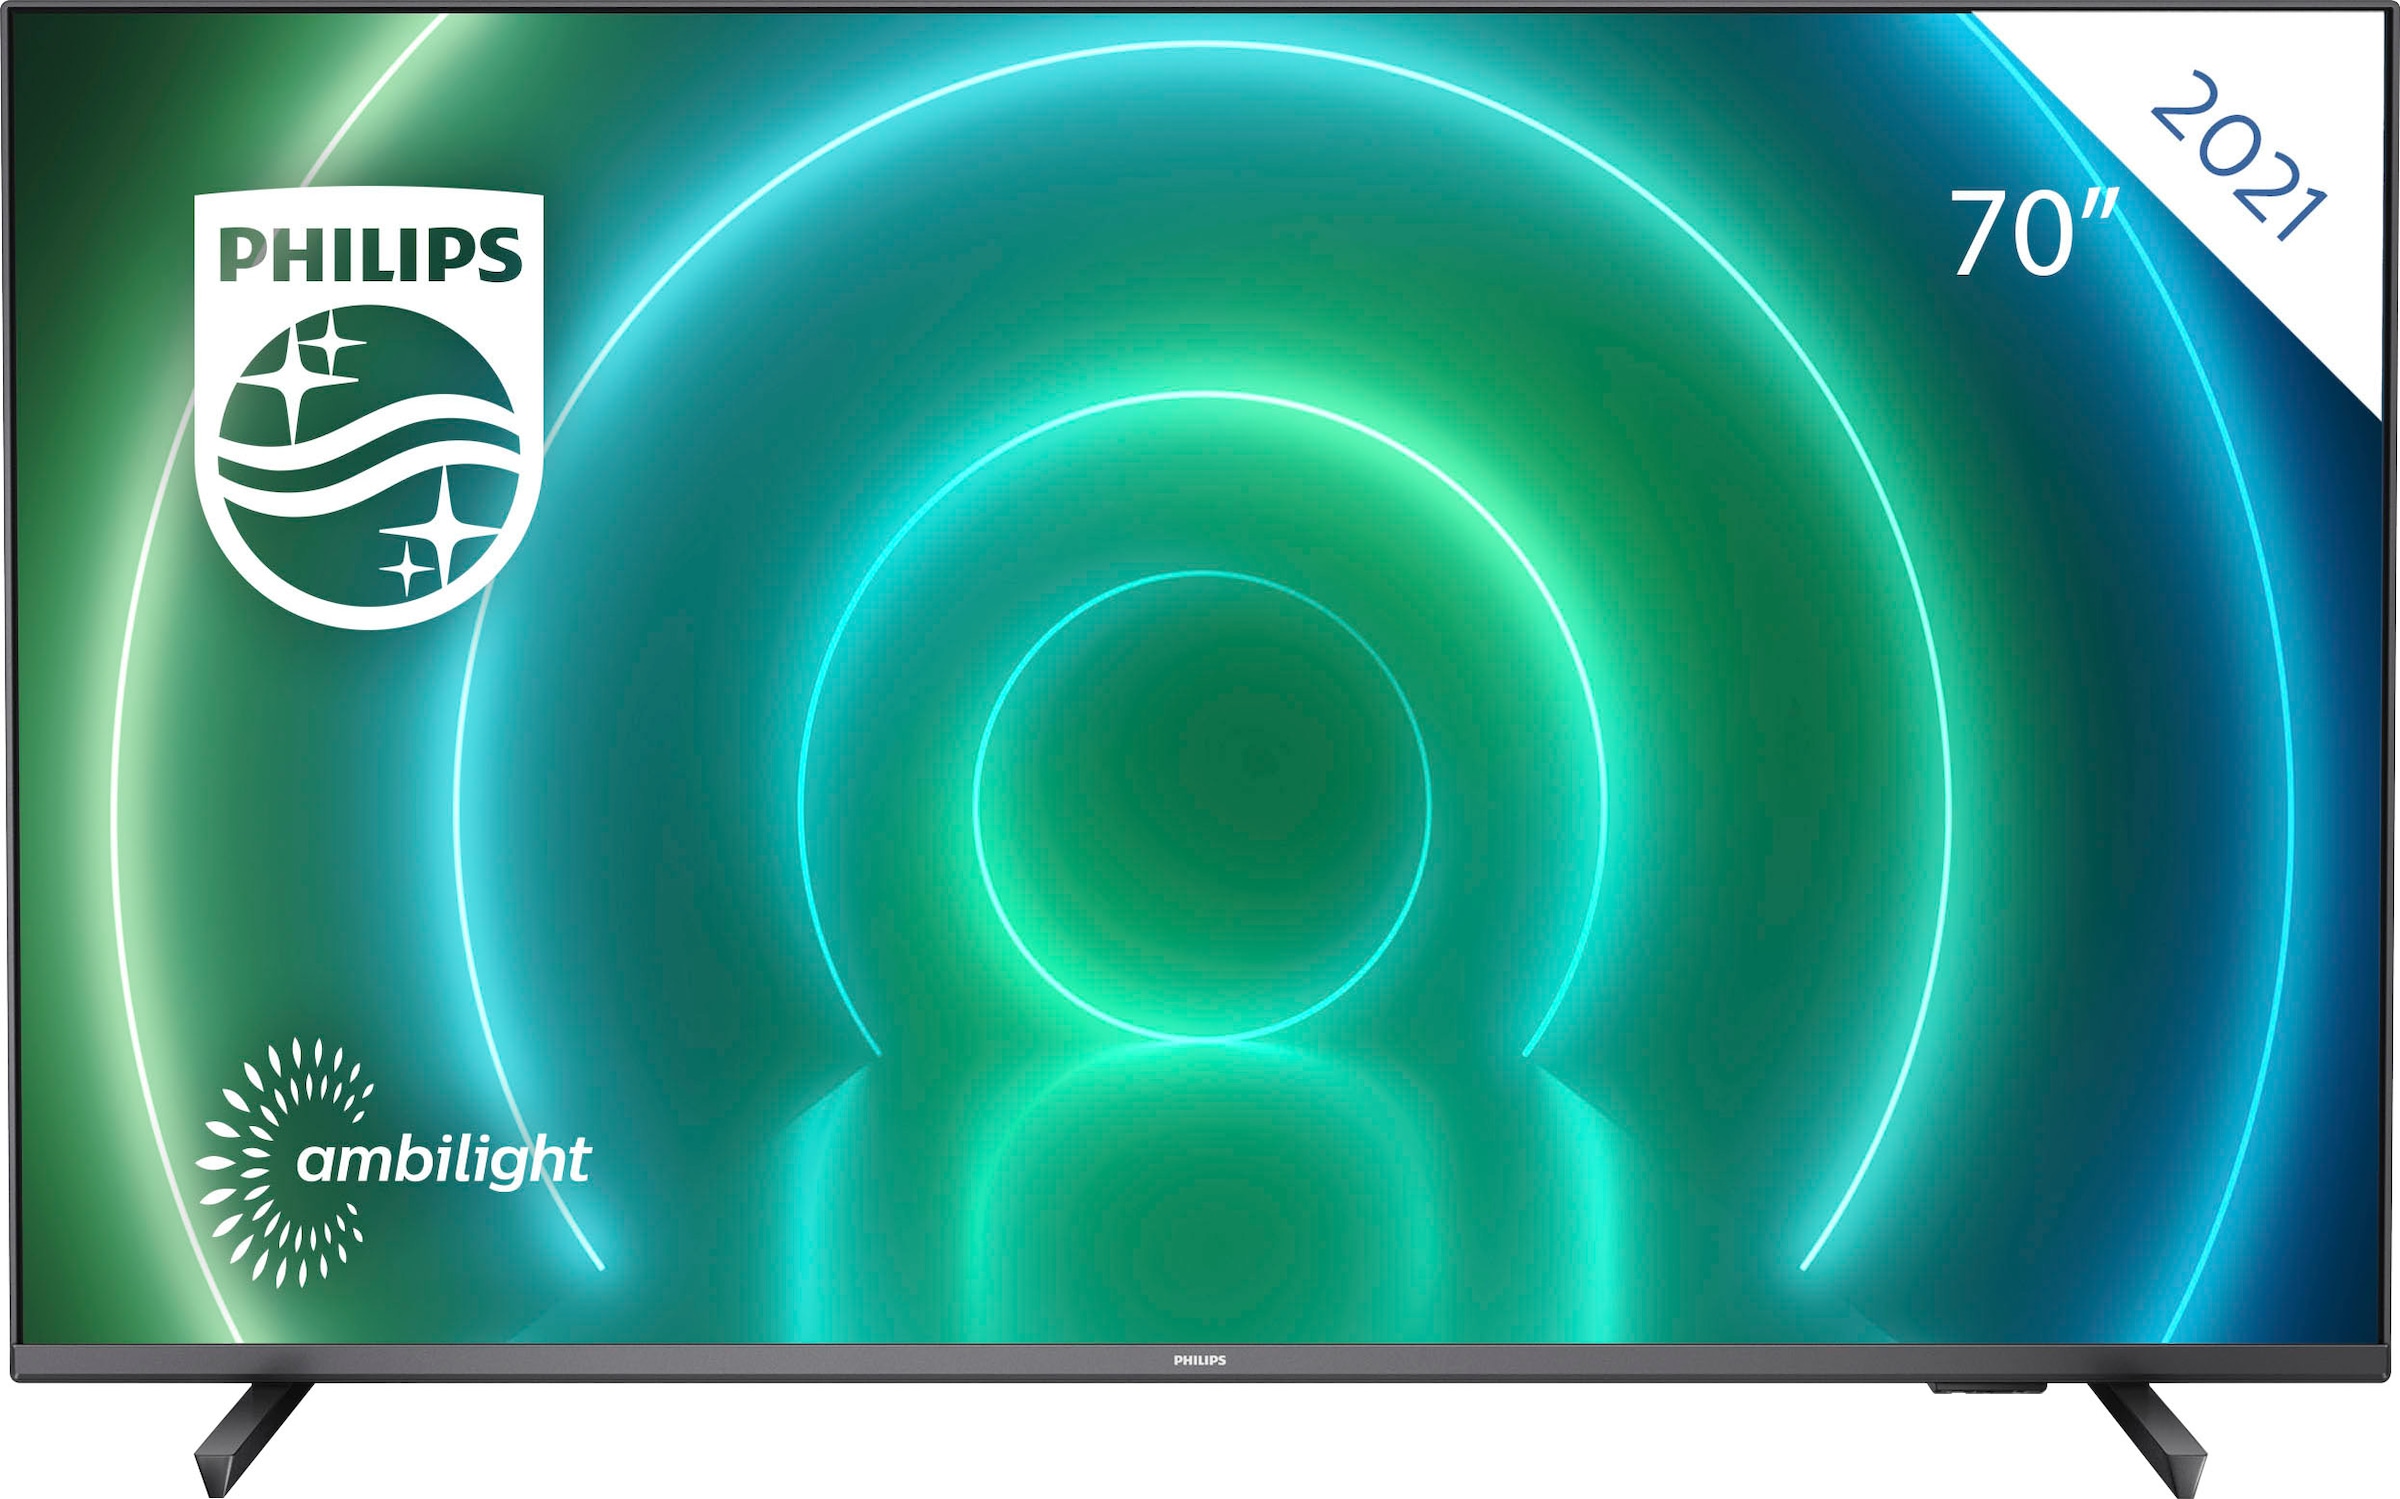 OTTO Zoll, 177 cm/70 LED-Fernseher 3-seitiges bei Android HD, TV-Smart-TV, Philips »70PUS7906/12«, 4K Ultra Ambilight kaufen